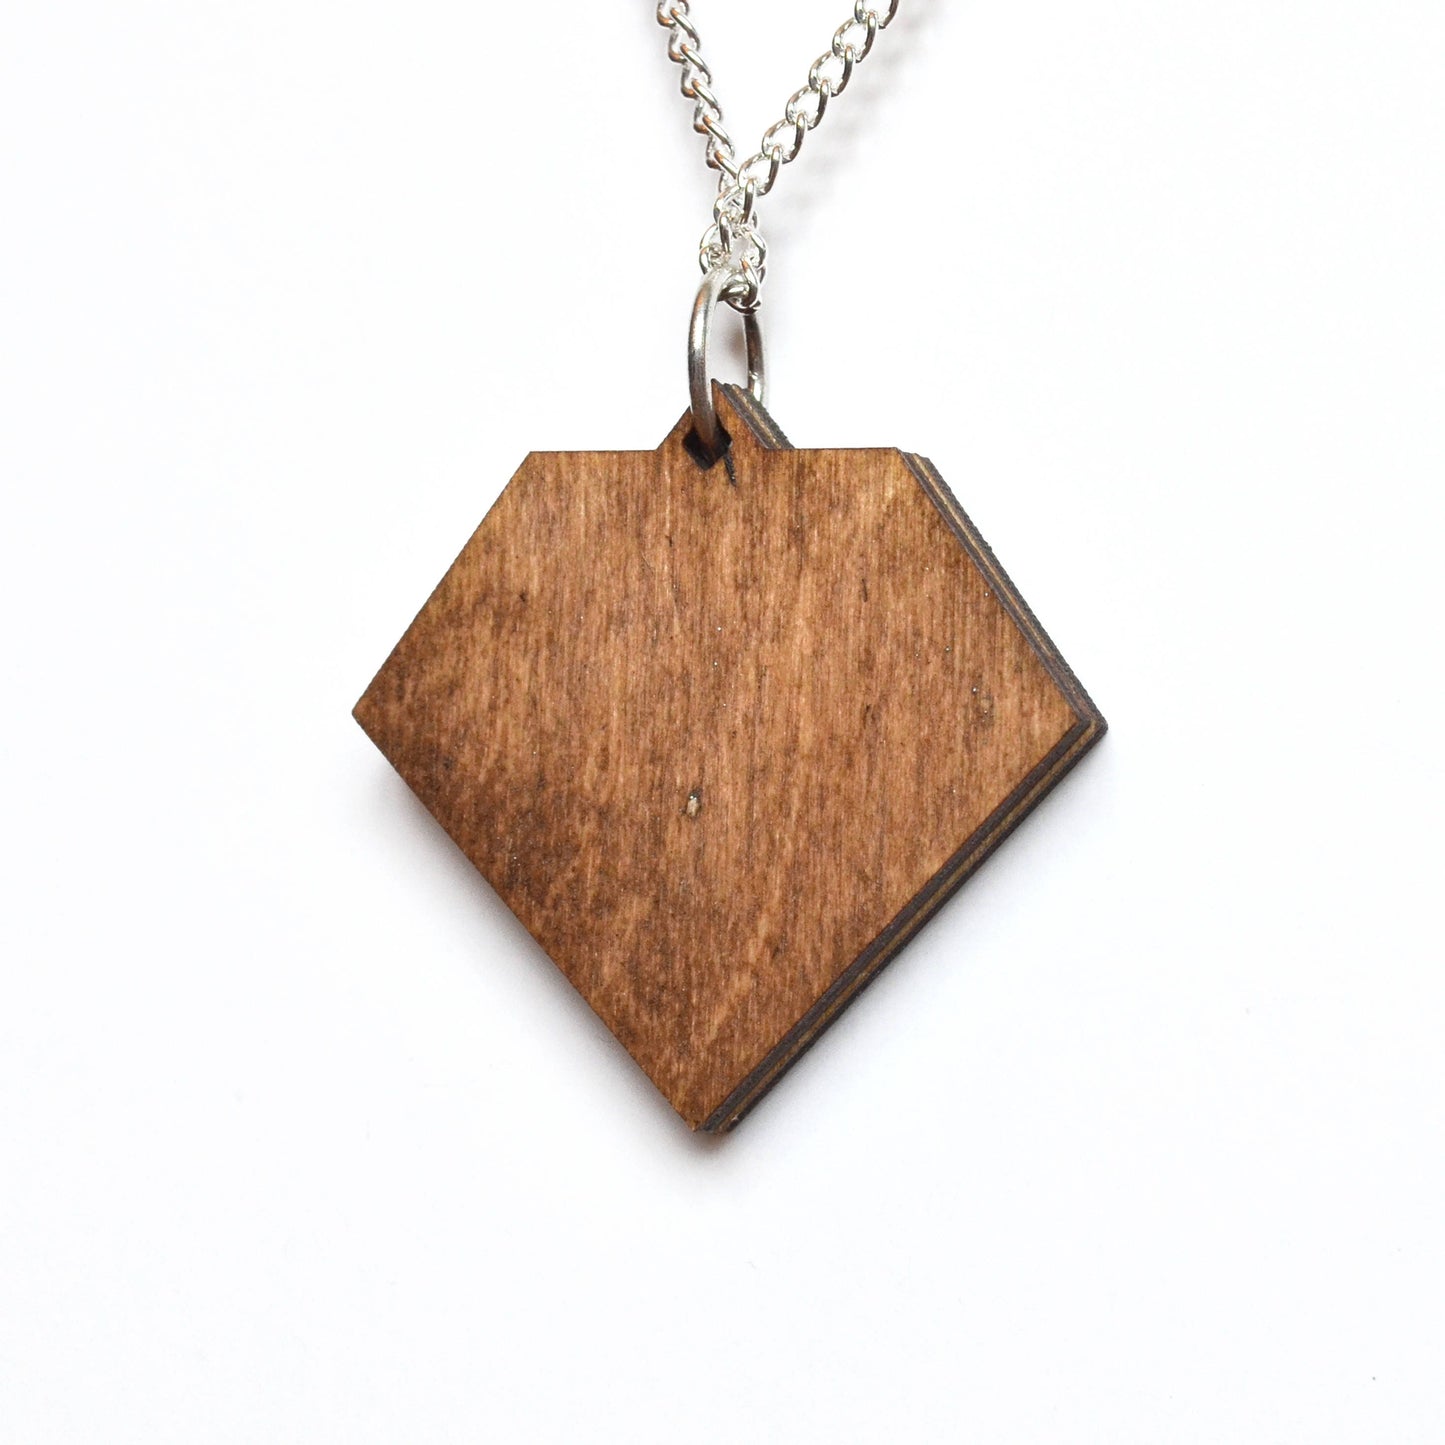 Hand Painted Wooden Diamond Art Deco Geometric Laser Cut Necklace - Small Style Design 1